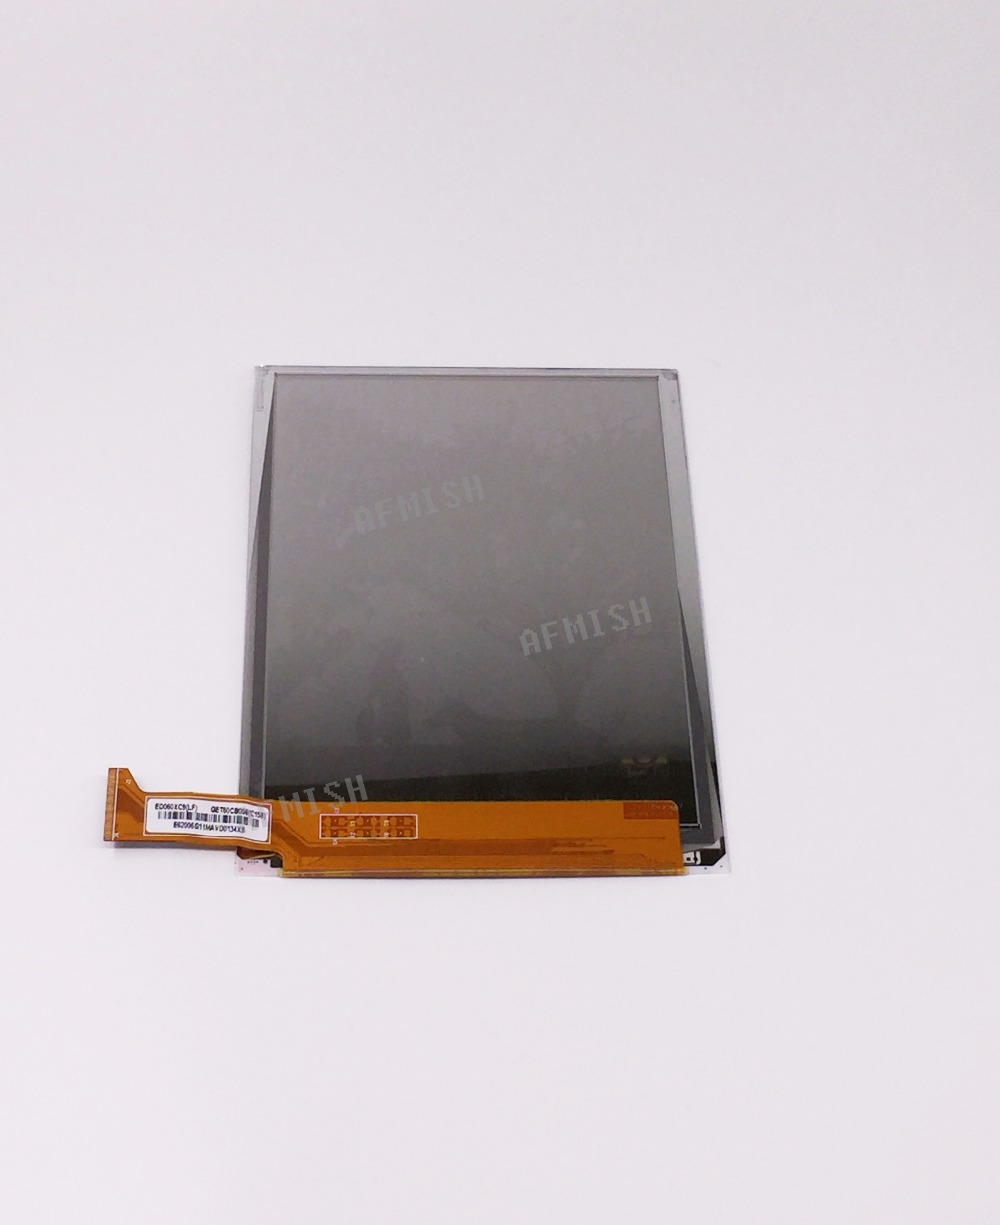 ED060XC5 Original New 6inch e-ink eink LCD Display screen glossy For Sony Prs-T3 Prs T3 Prst3 ebook E-book Readers free shipping